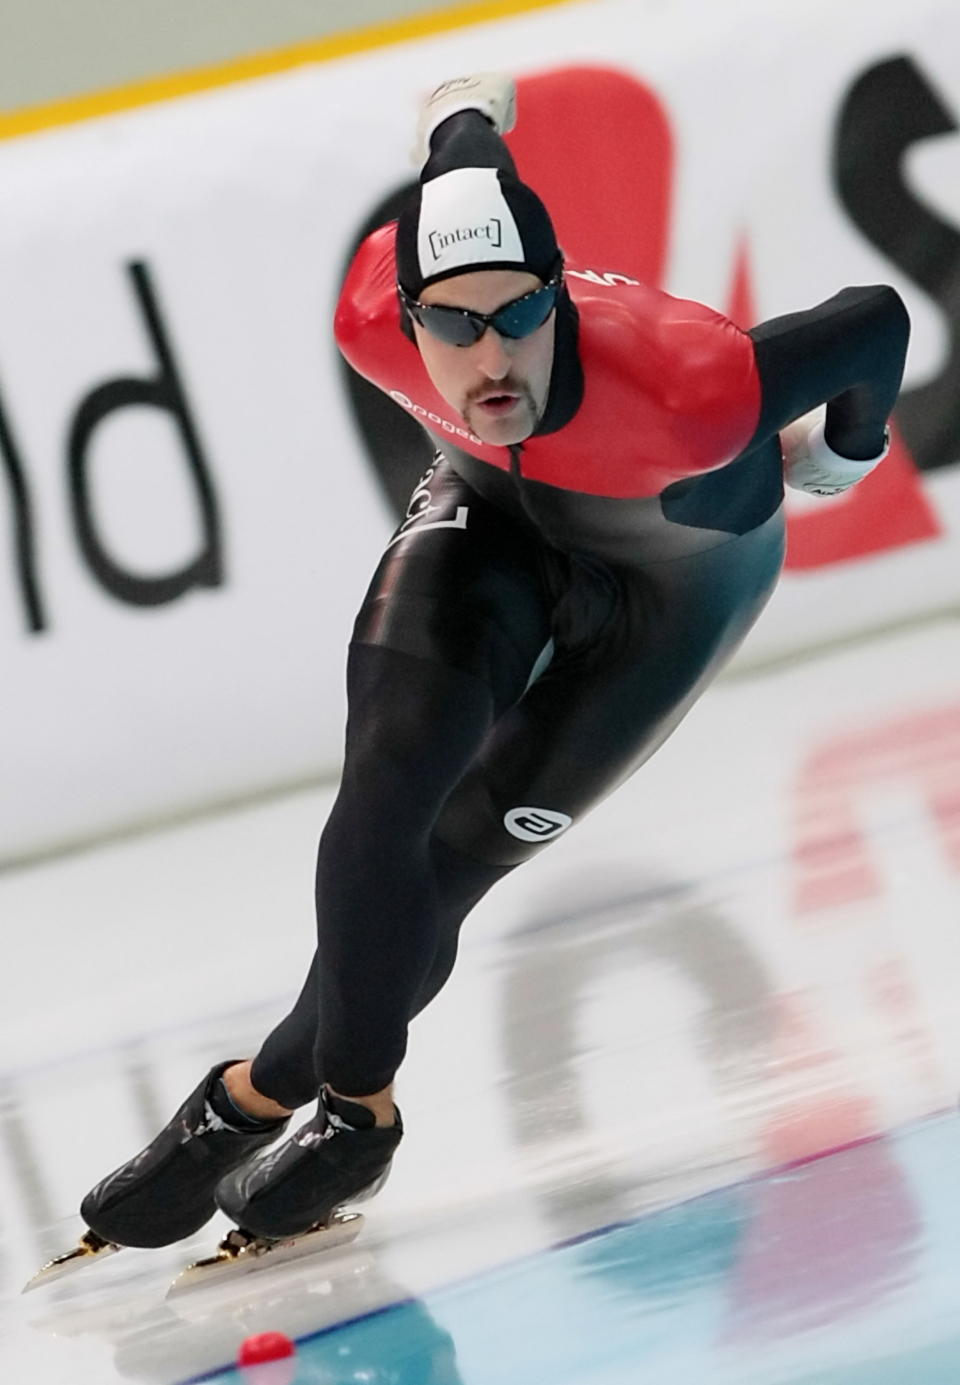 Canada's Denny Morrison competes in the  Men's 1500 m at the Essent ISU World Cup Astana on November 25, 2011,  in Astana, Kazakhstan.AFP AFP PHOTO / STANISLAV FILIPPOV (Photo credit should read STANISLAV FILIPPOV/AFP/Getty Images)